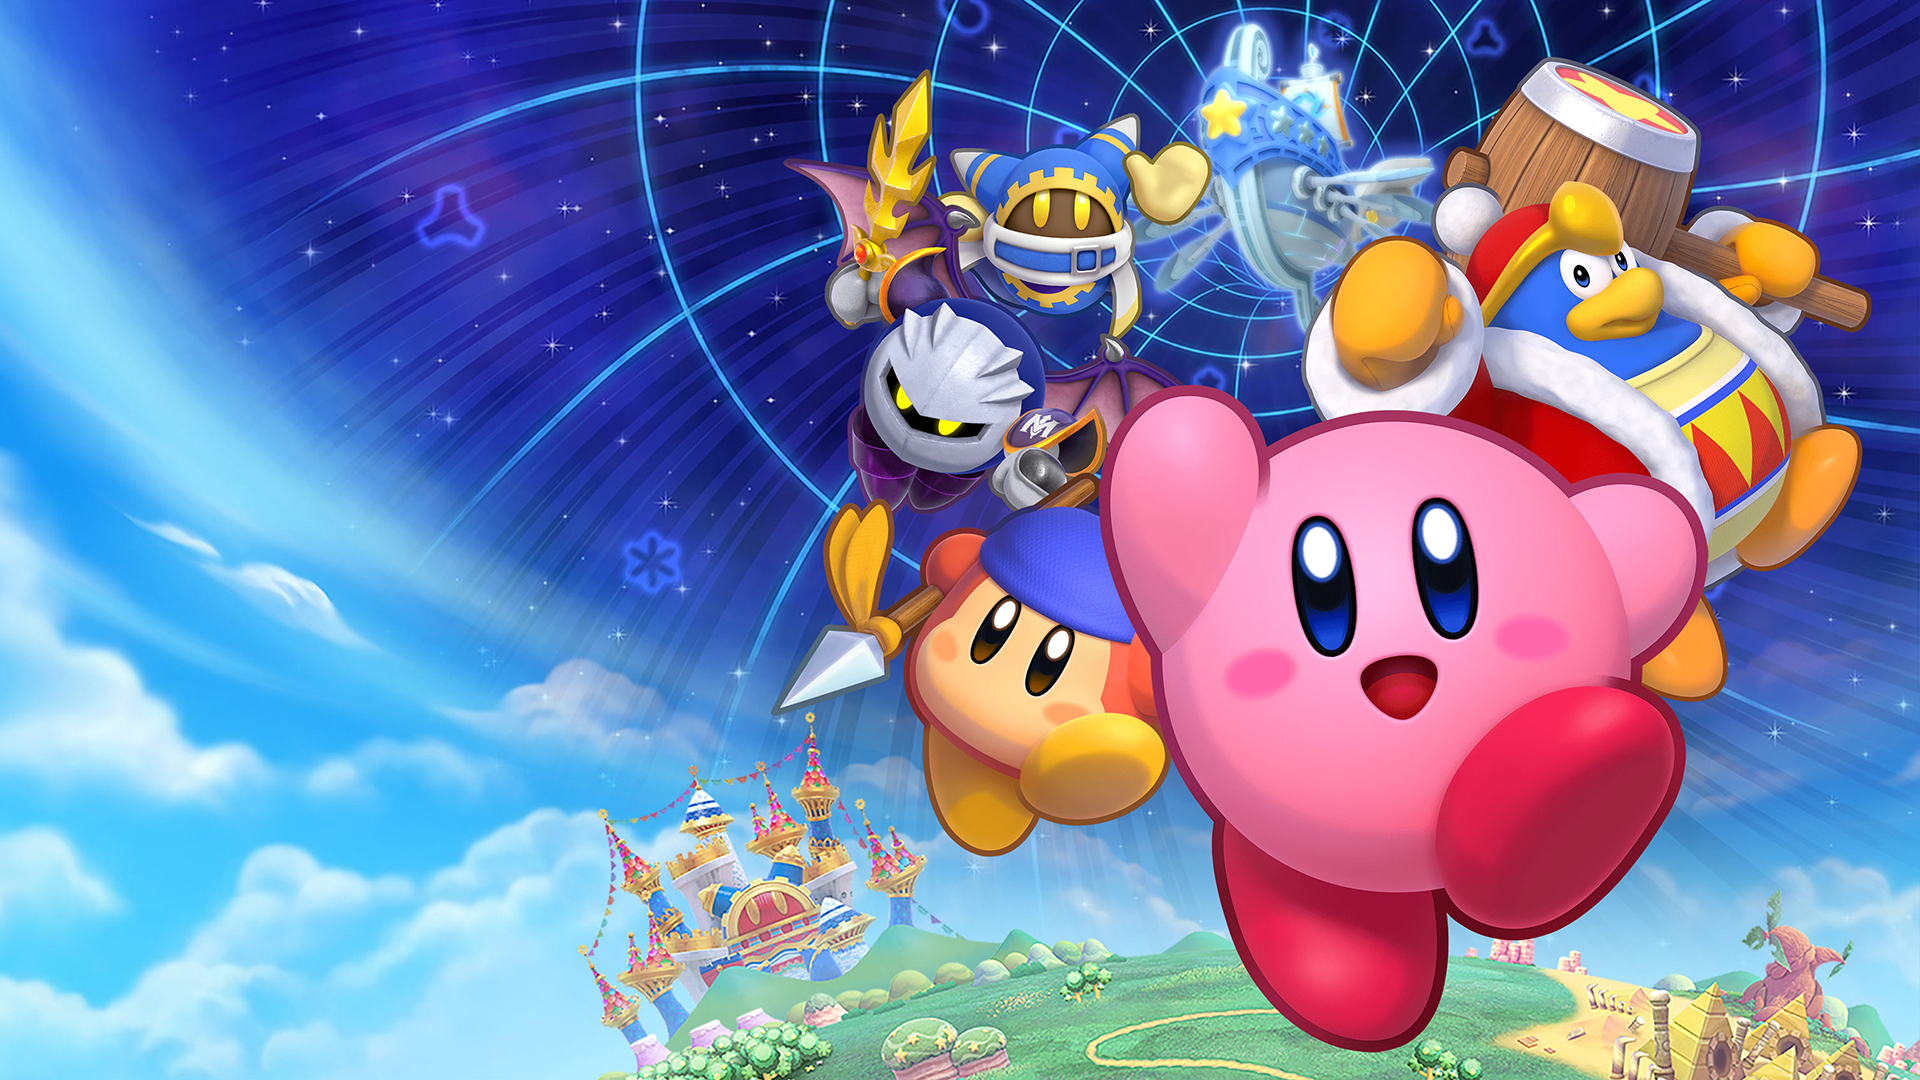 About: Kirby wallpapers HD (Google Play version)